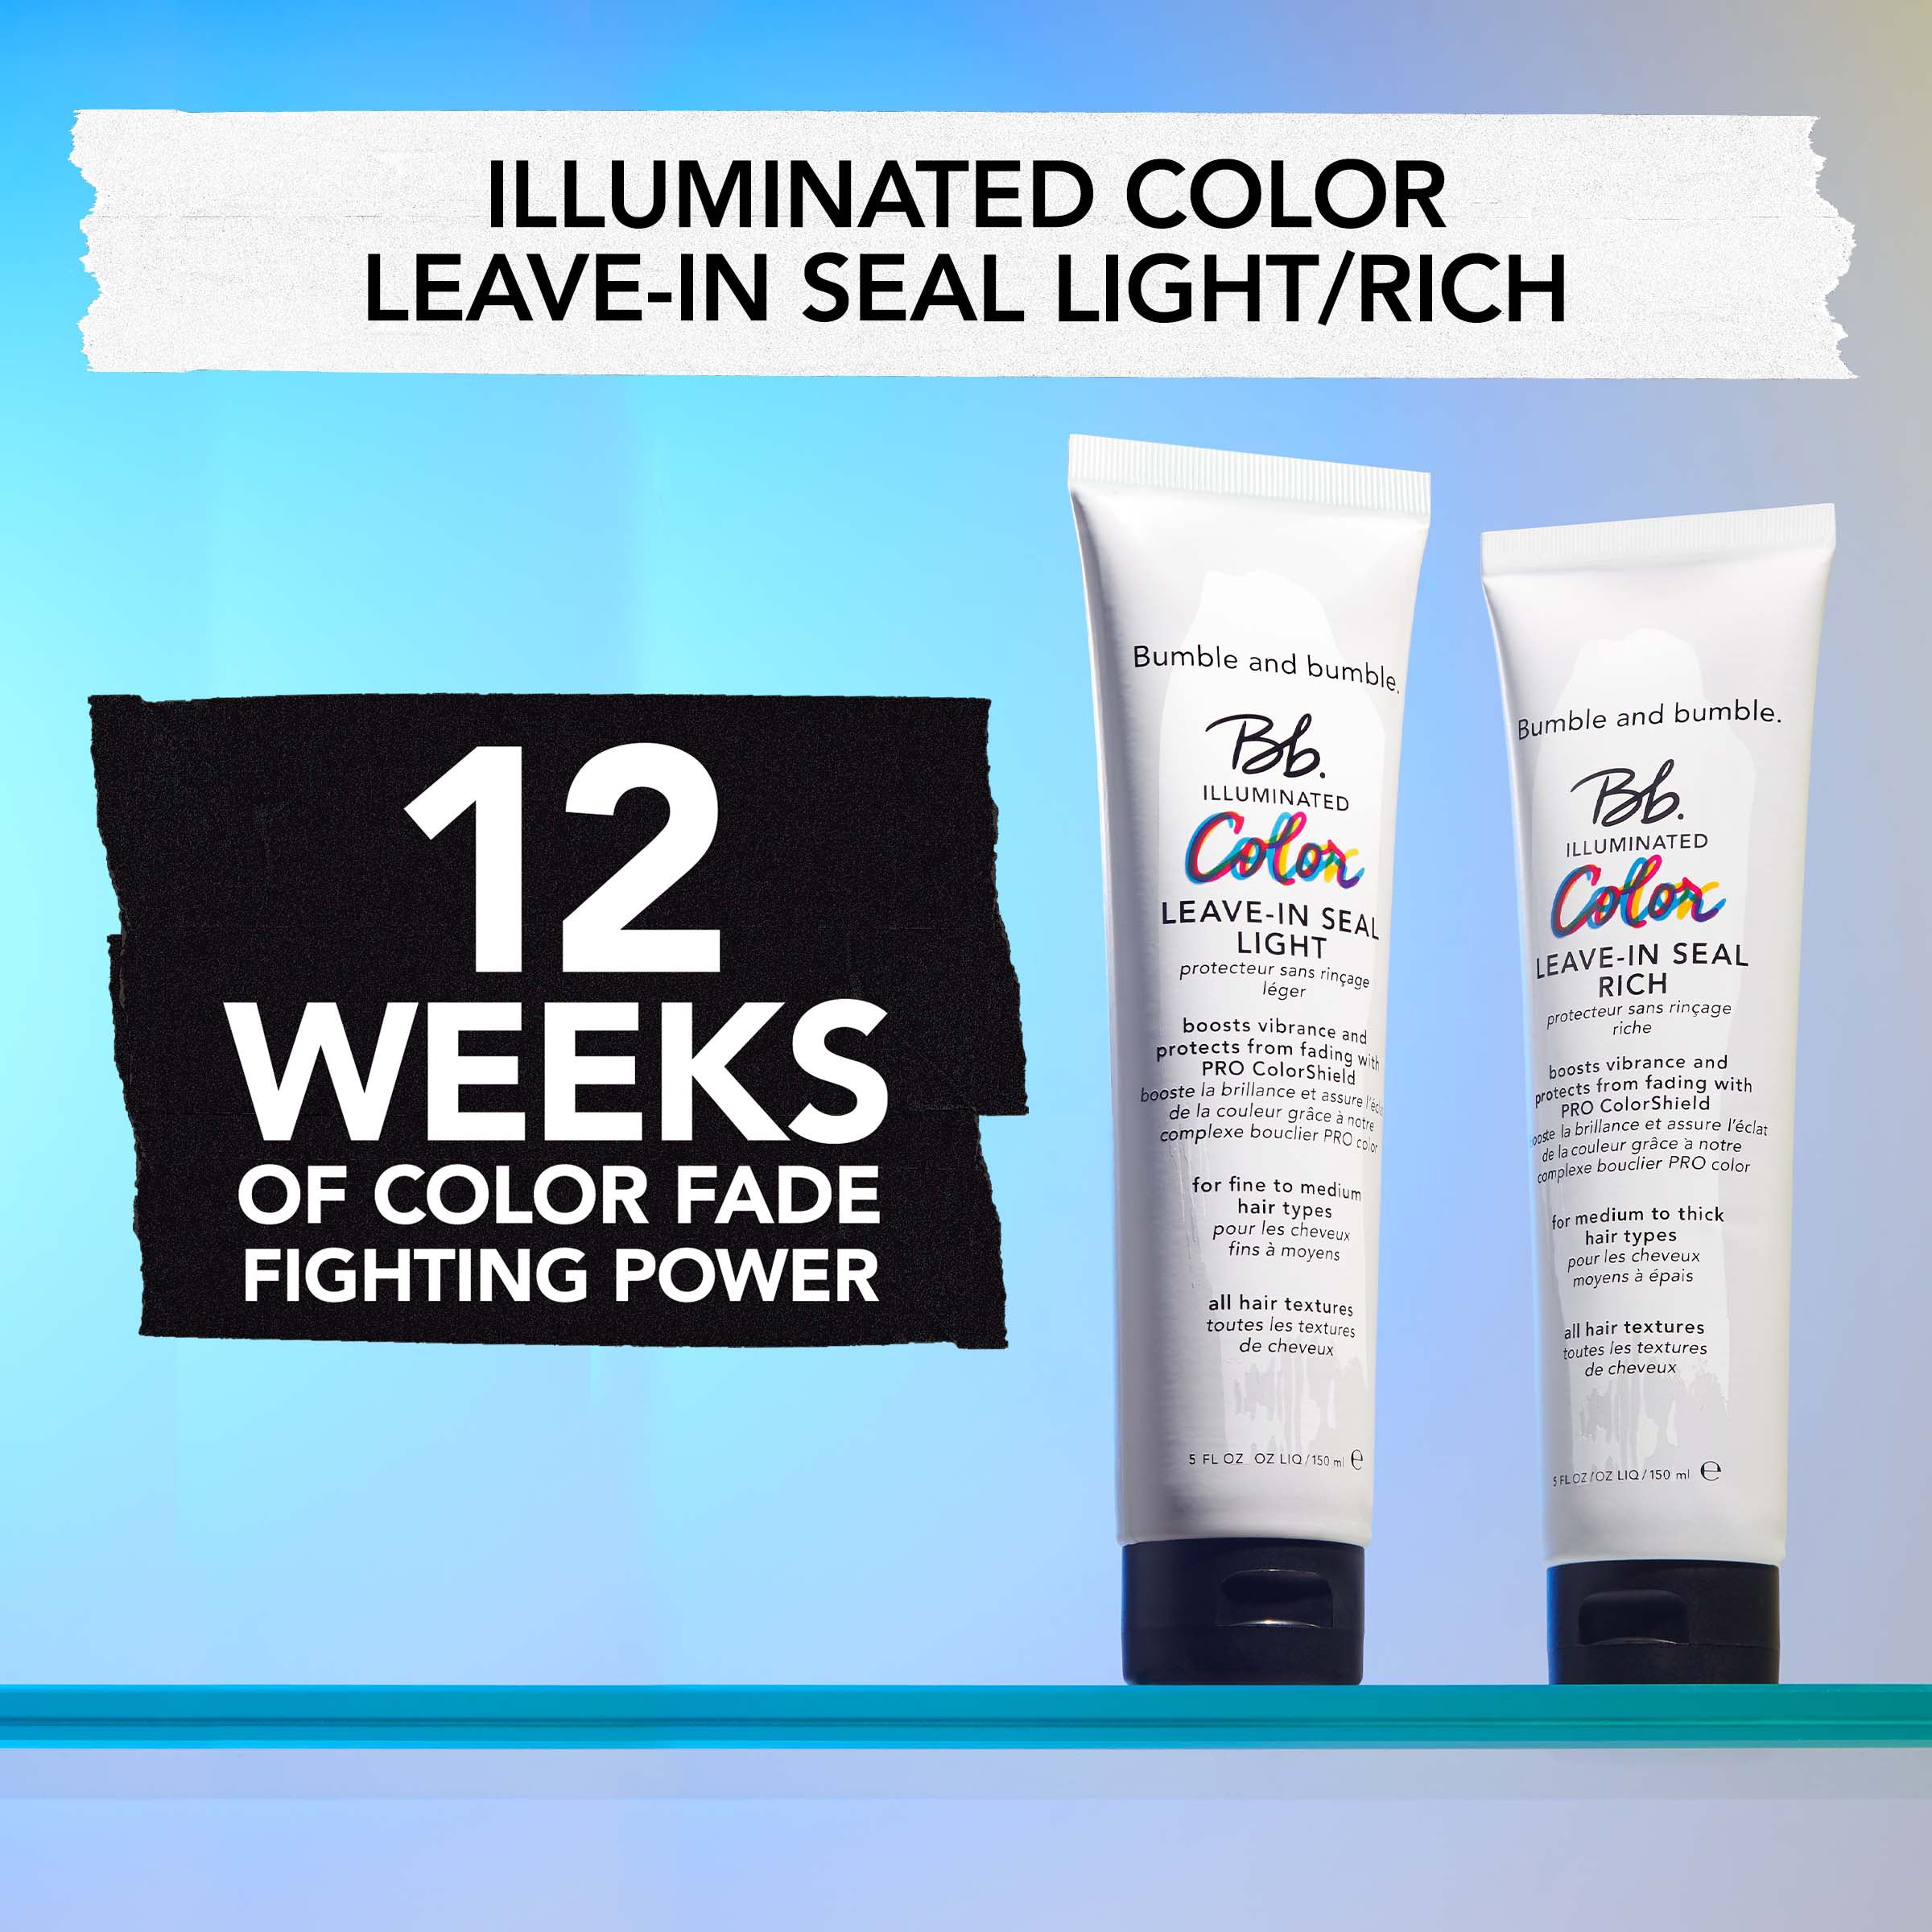 Bumble and Bumble Illuminated Colour Leave-in Seal Light